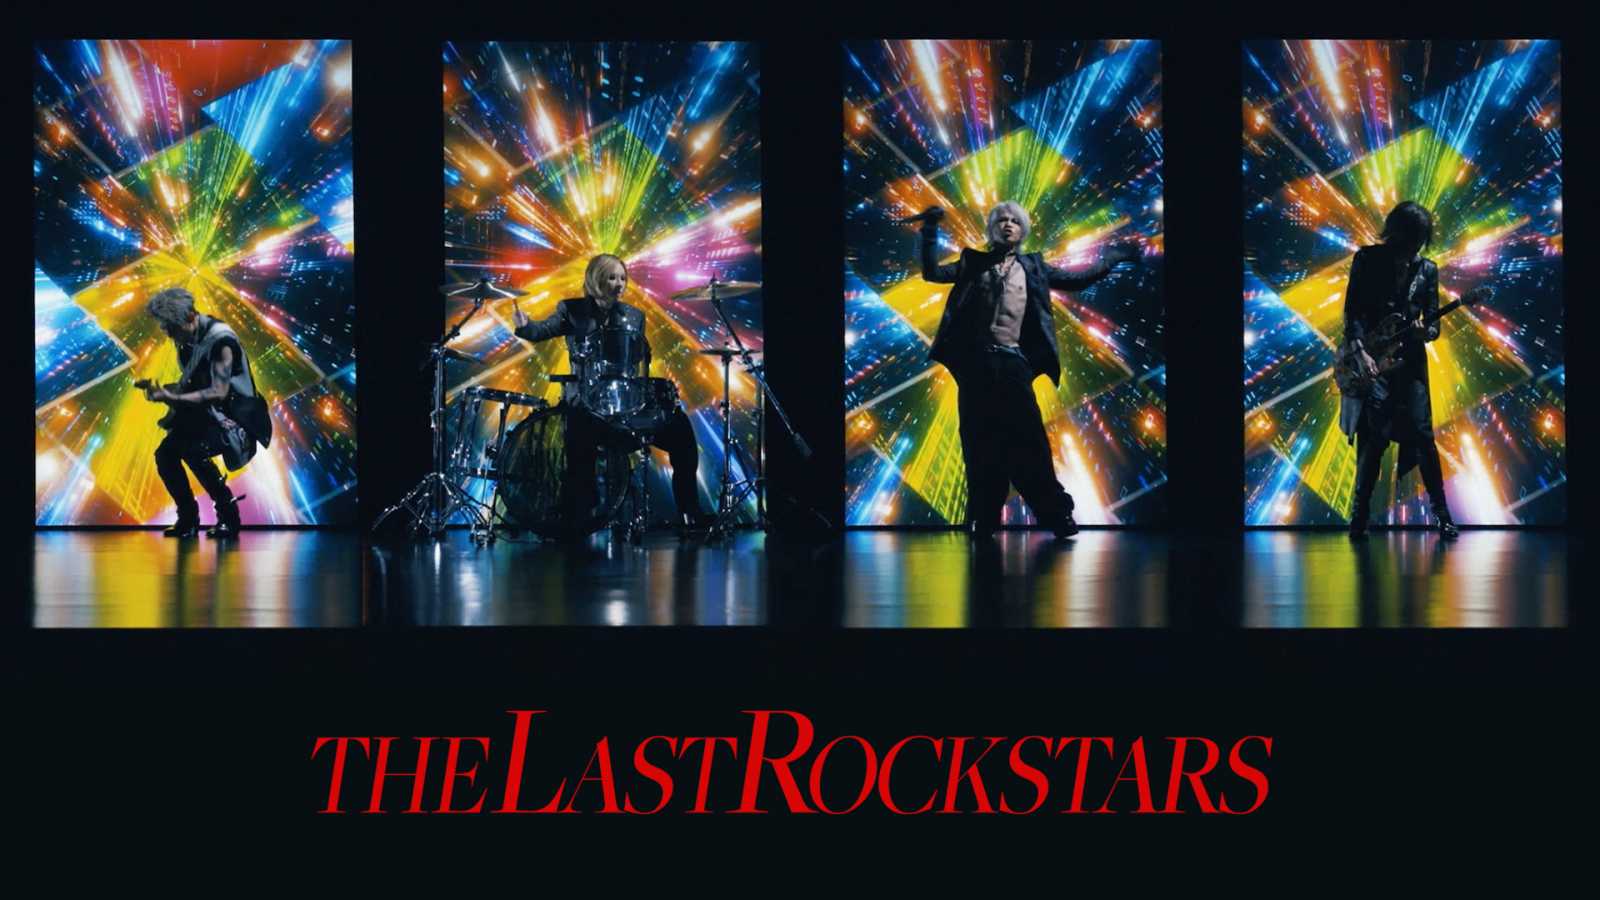 THE LAST ROCKSTARS Reveal Music Video for "The Last Rockstars (Paris Mix)" © THE LAST ROCKSTARS. All rights reserved.